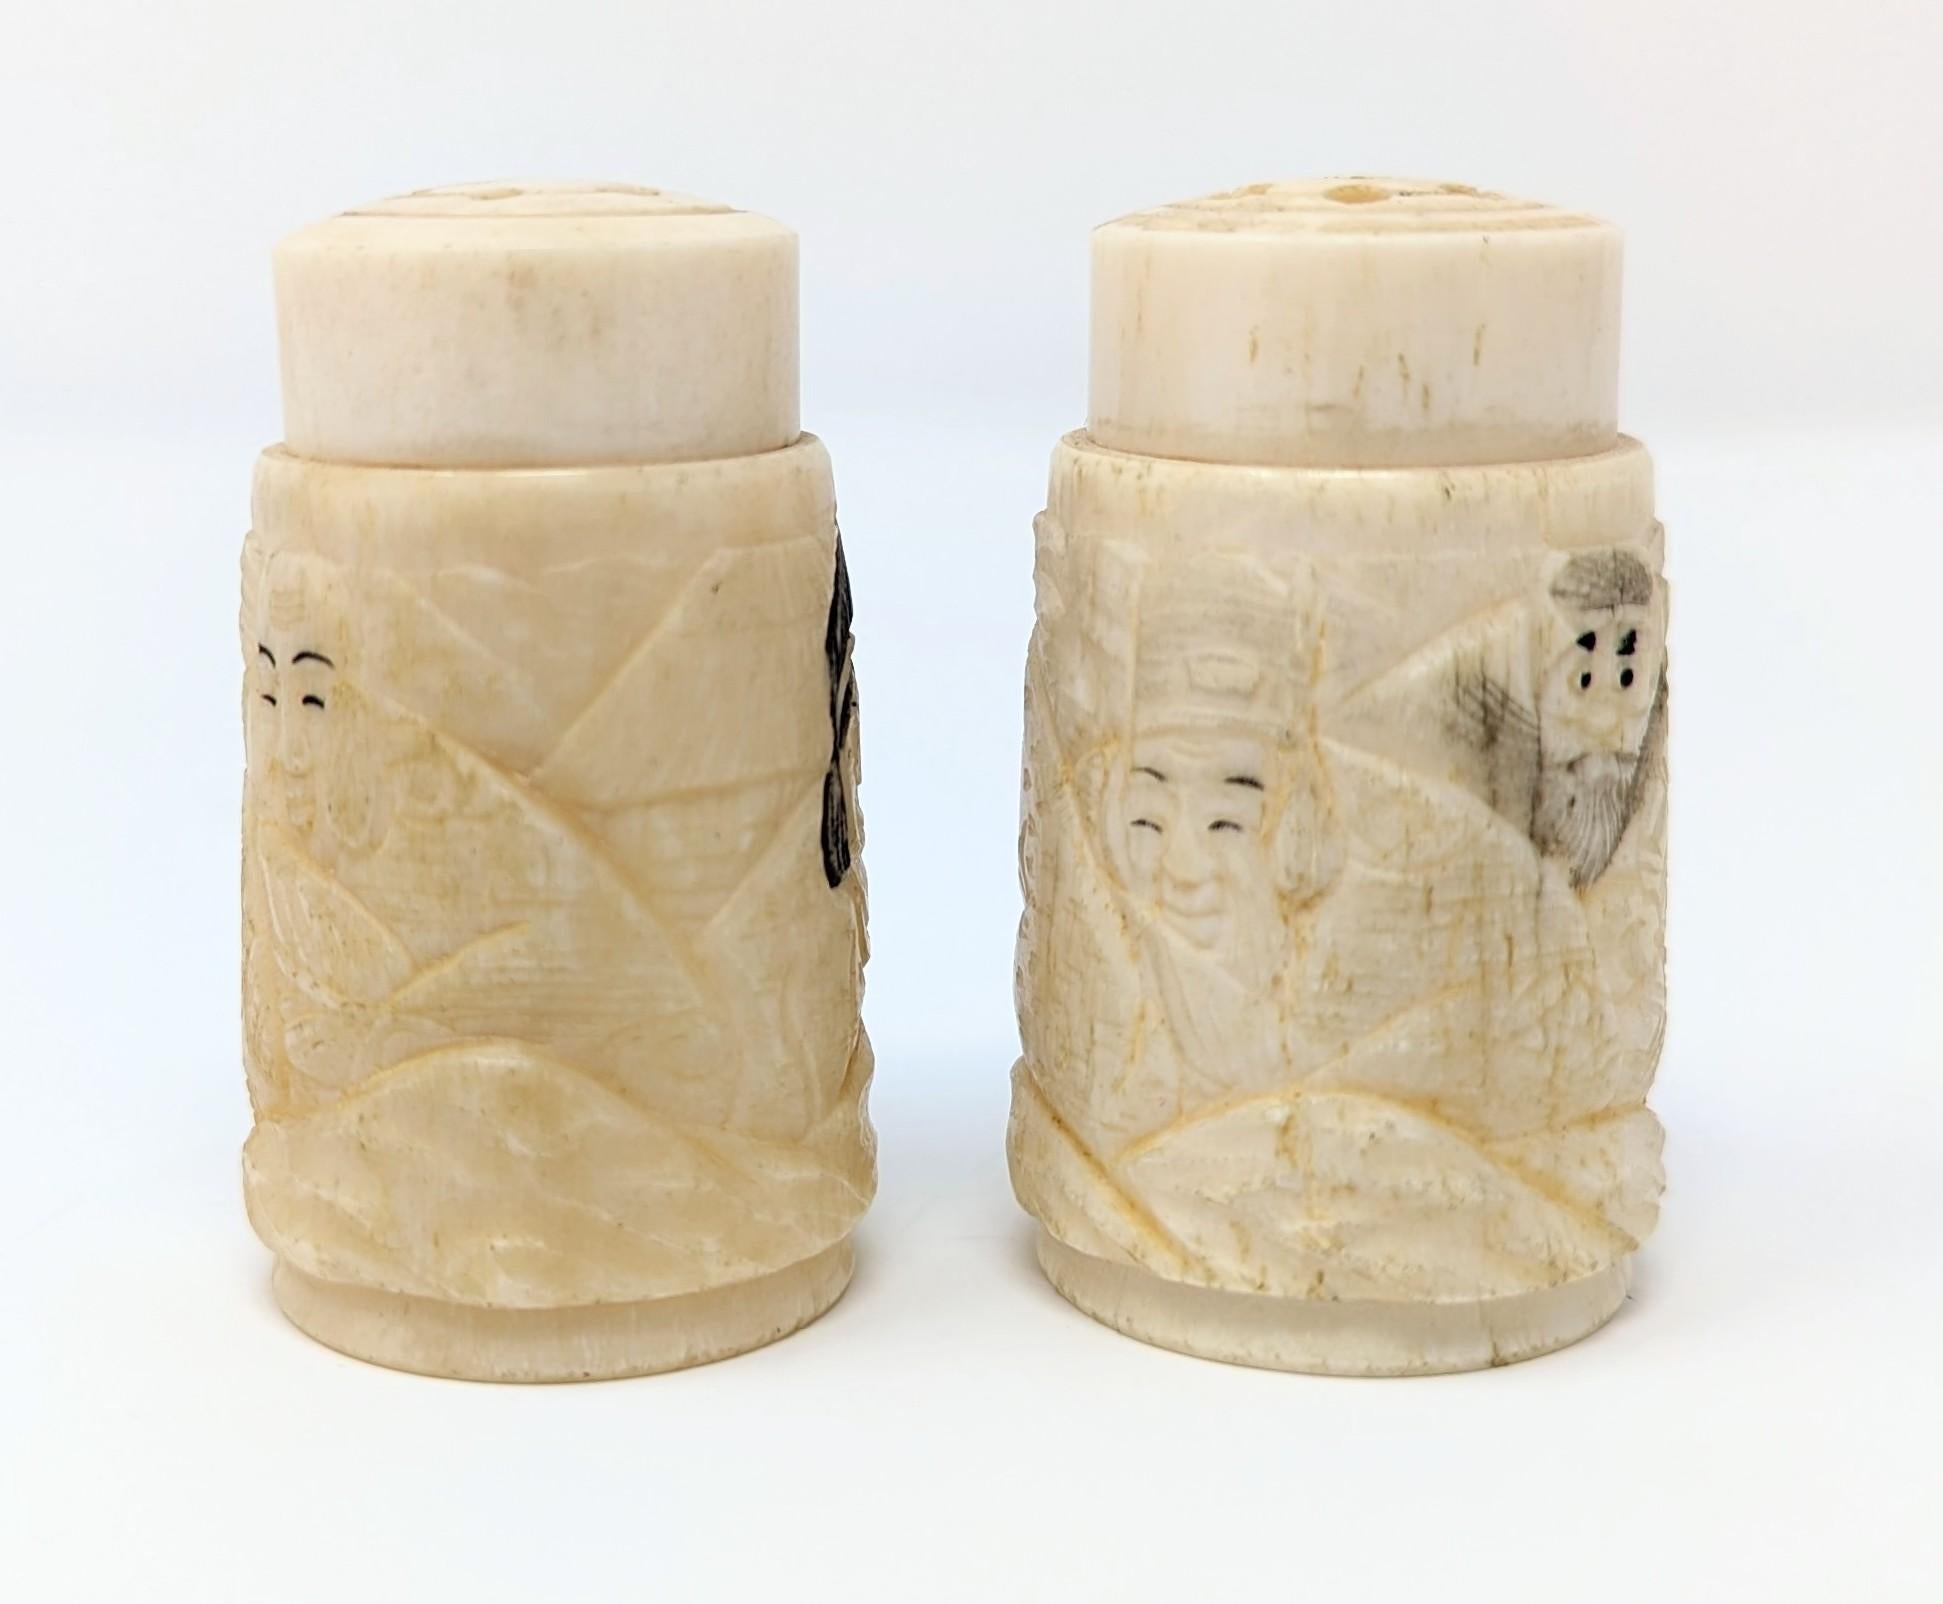 Beautifully hand carved bone salt and pepper shakers with light inkwork. Either Japanese or Chinese, possibly representing the Seven Lucky Gods. Measures 1.2 inches in width by 2 inches in height. The tops screw off and on, but please note there is